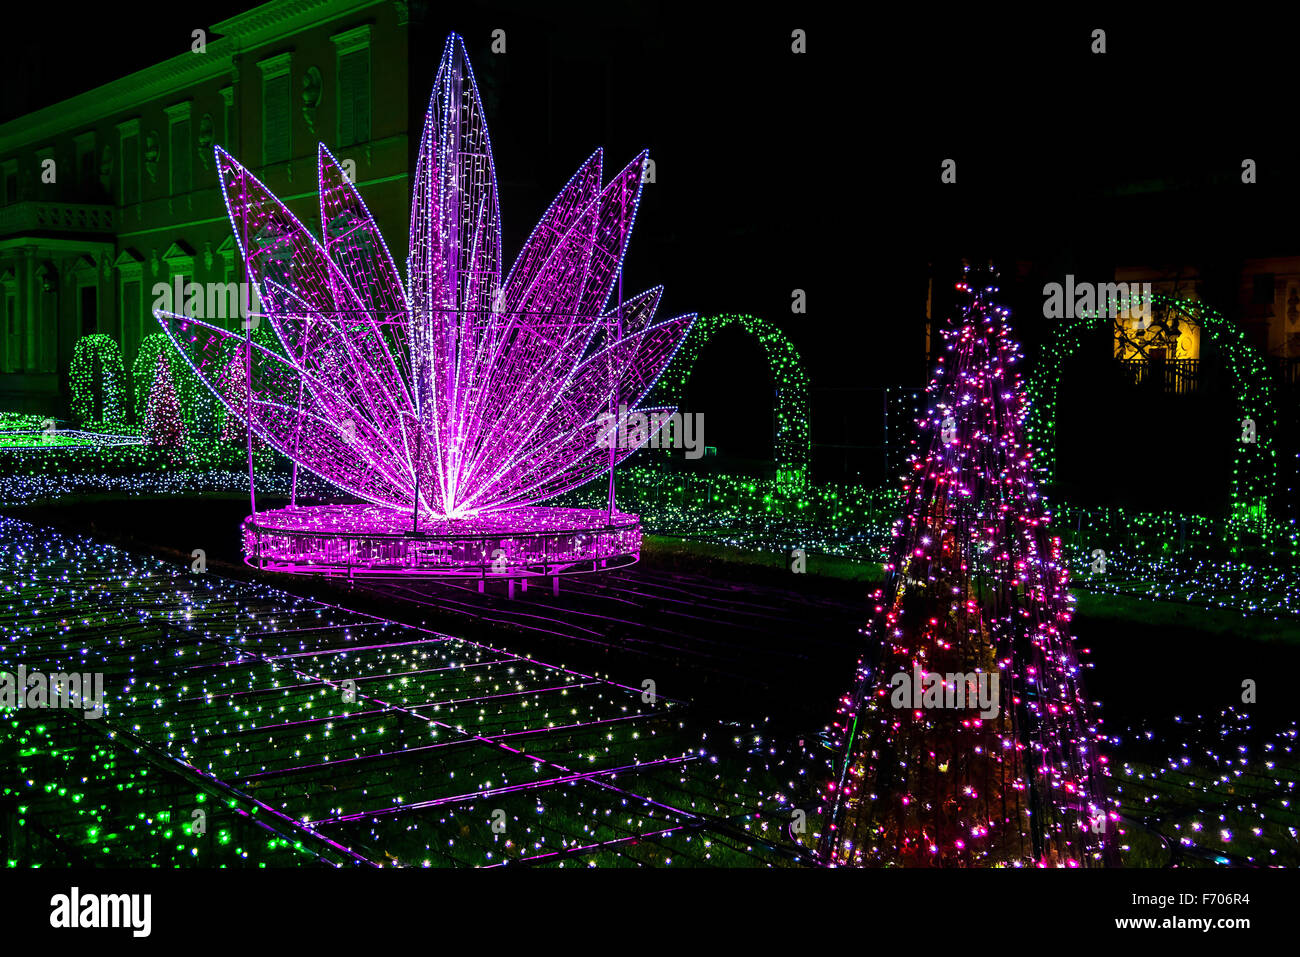 Garden of Light with Christmas Silhouettes from Colorful Garlands Stock Photo